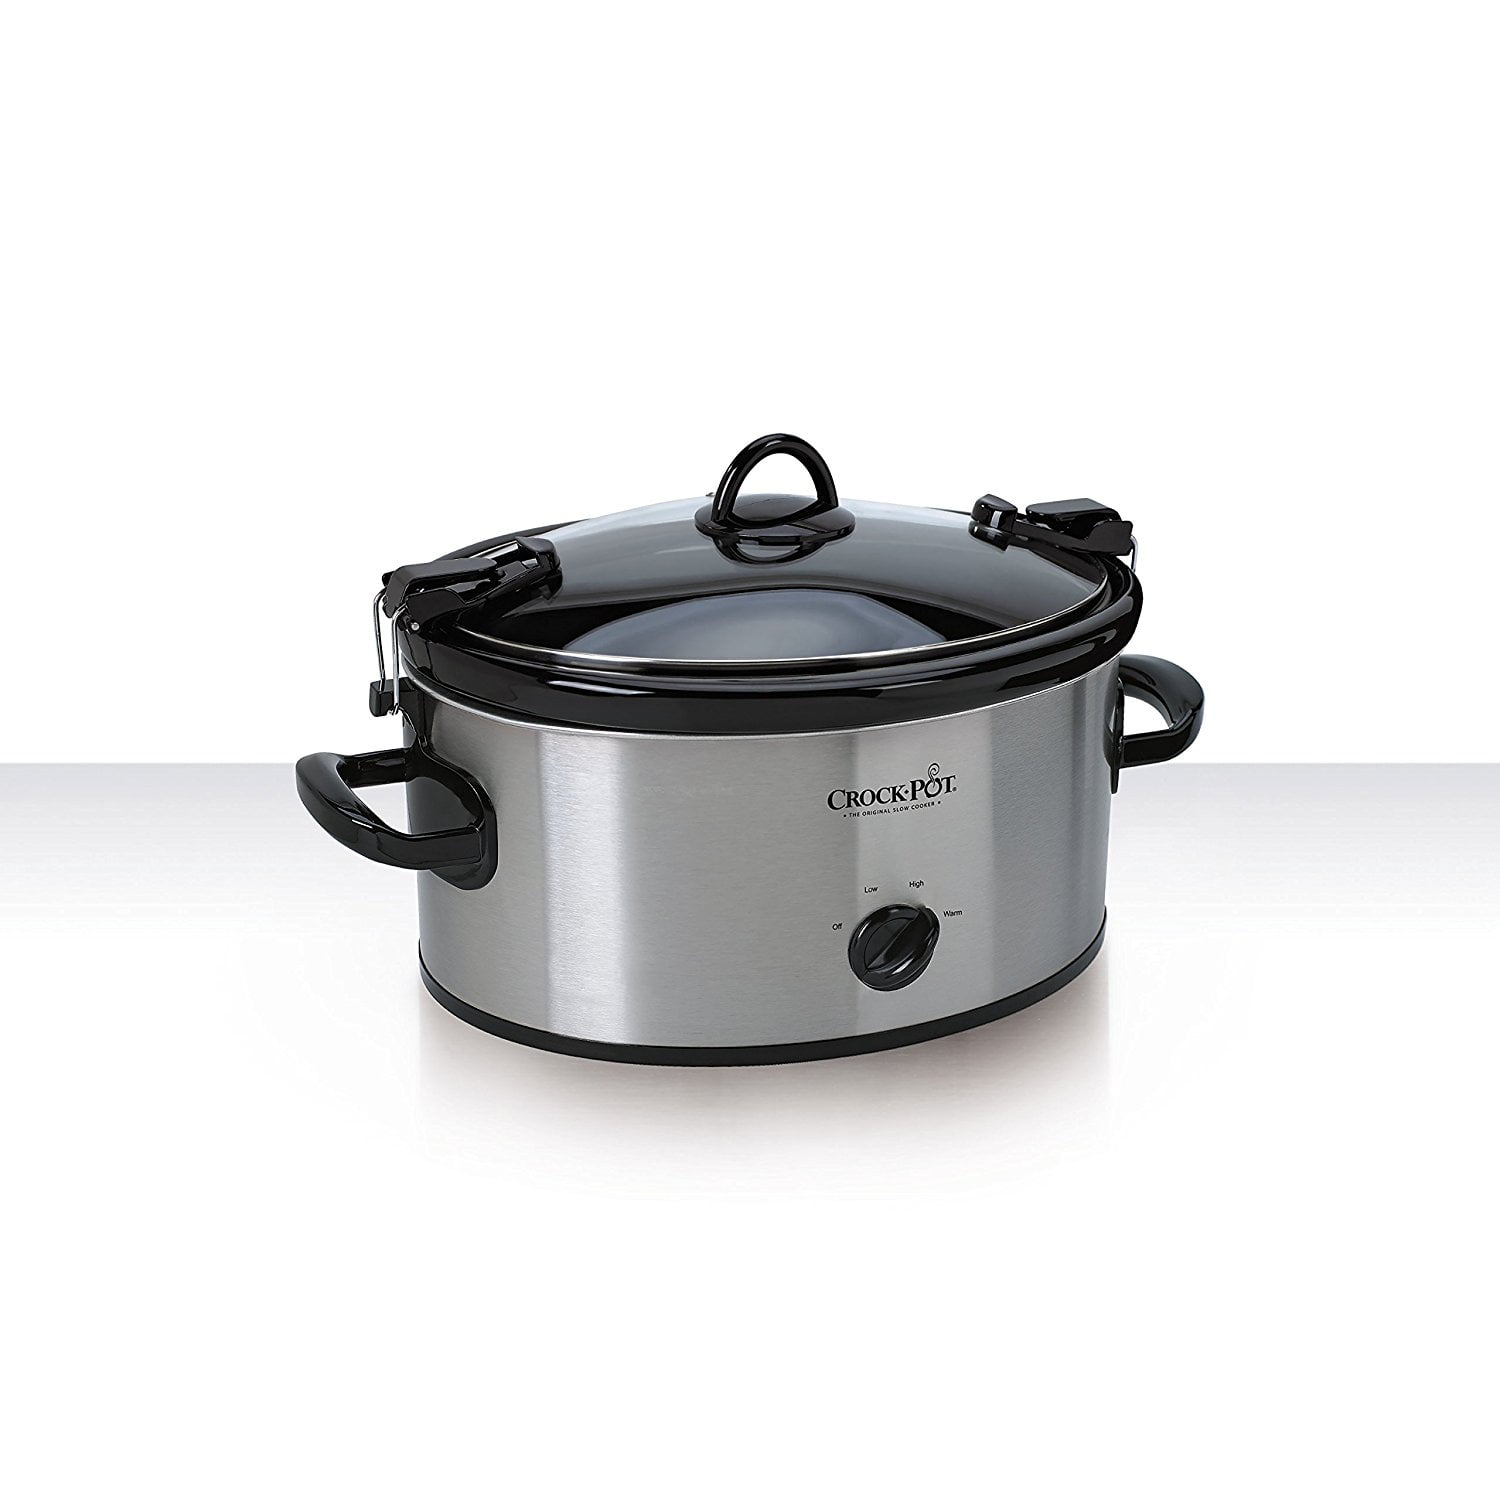 Crockpot 6-qt. Cook And Carry Manual Slow Cooker With Little Dipper  Warmer.|4162